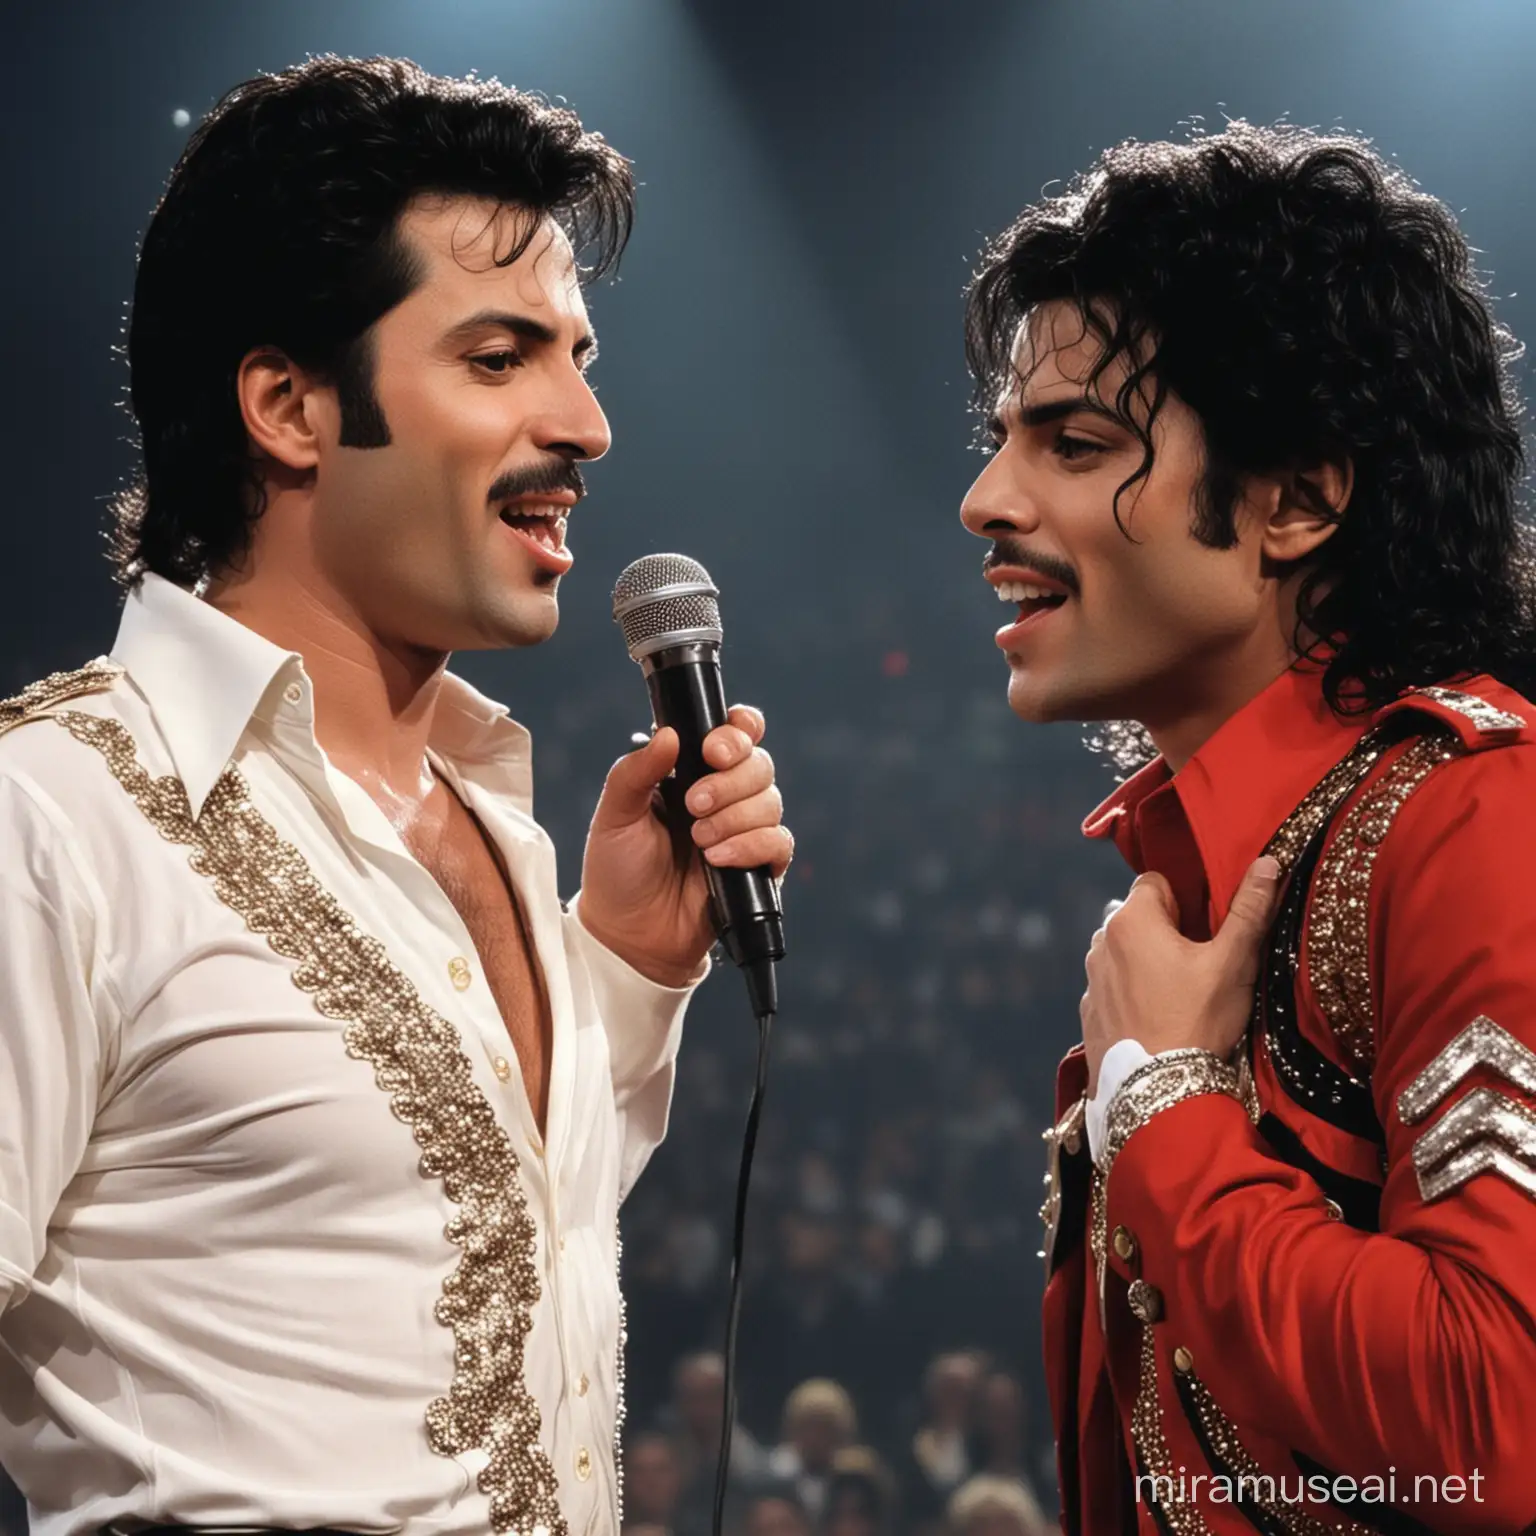 Iconic Singers Freddy Mercury and Michael Jackson Performing Live Concert Duet